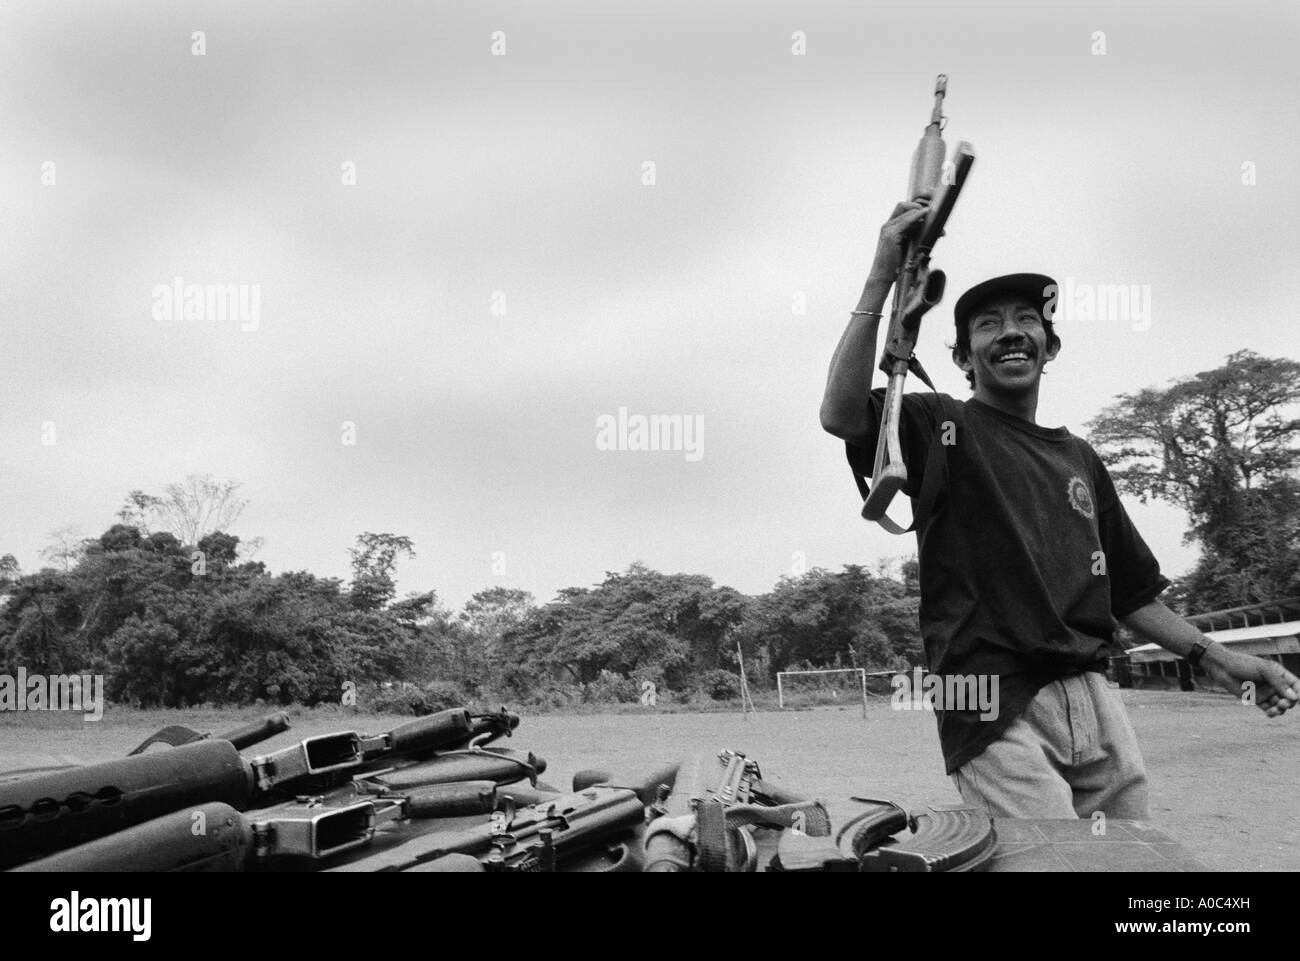 Stock image of a URNG guerrilla laying down his arms at demobilization Stock Photo